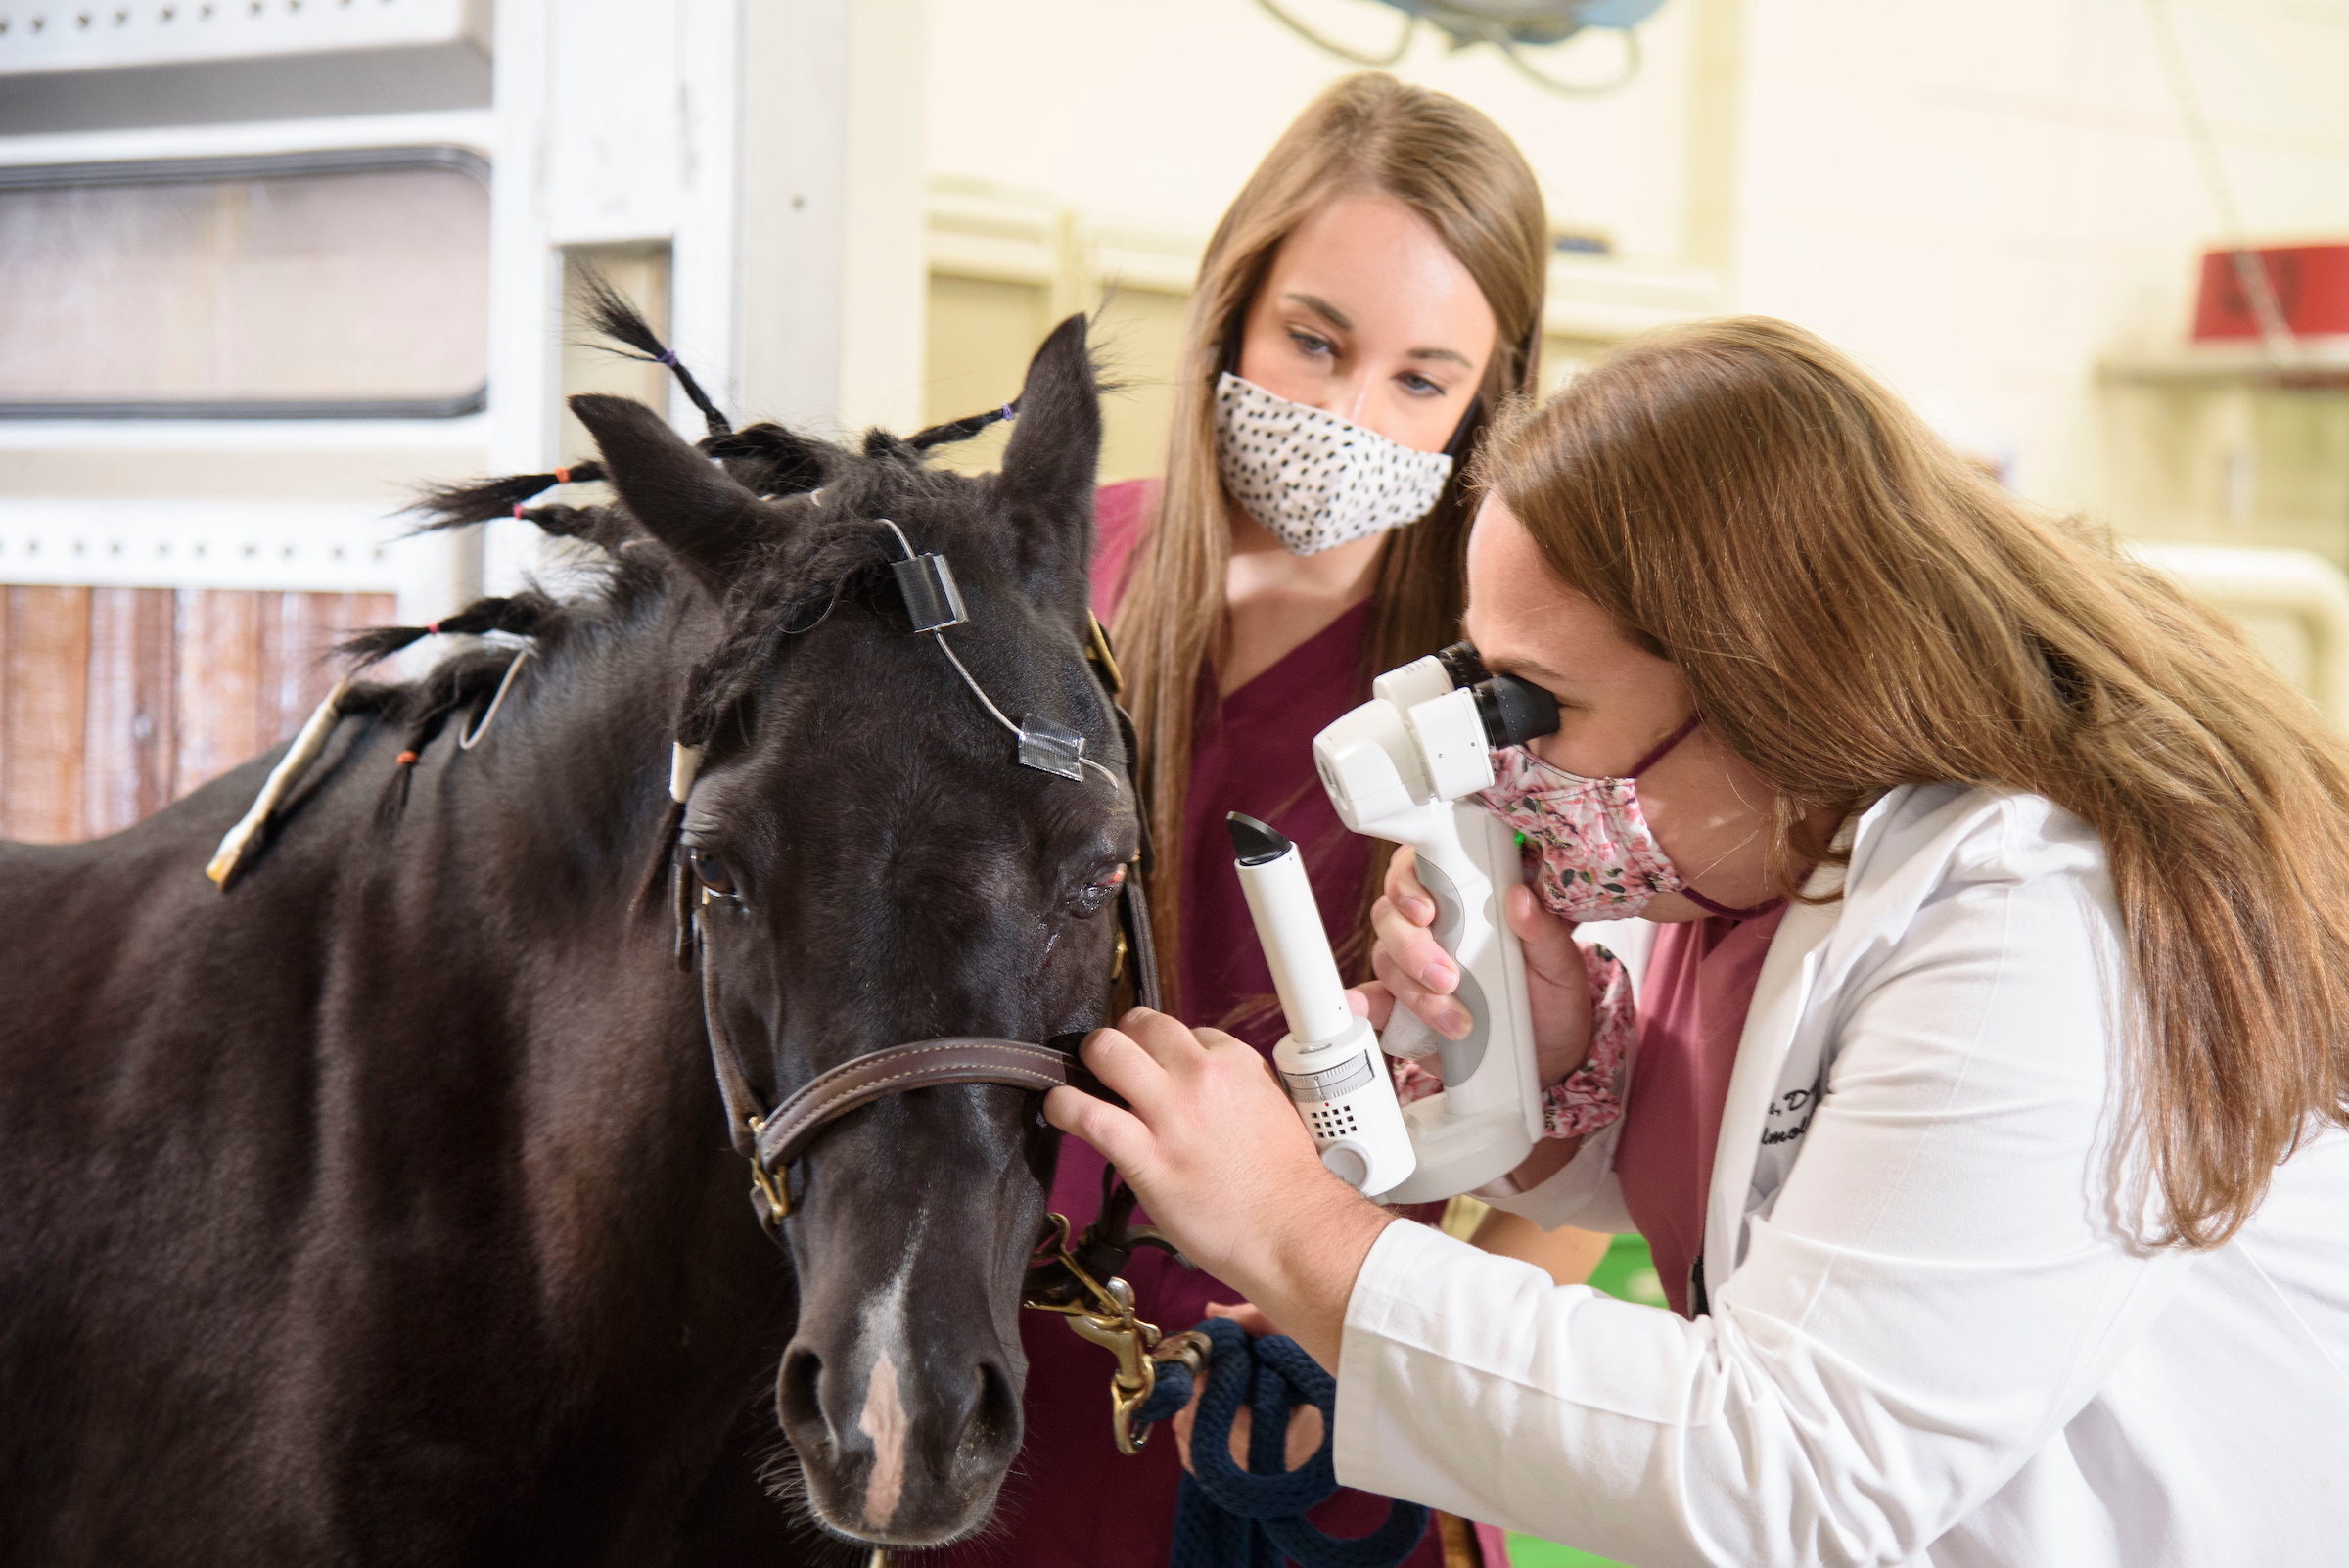 An ophthalmologist examines a horse's eye